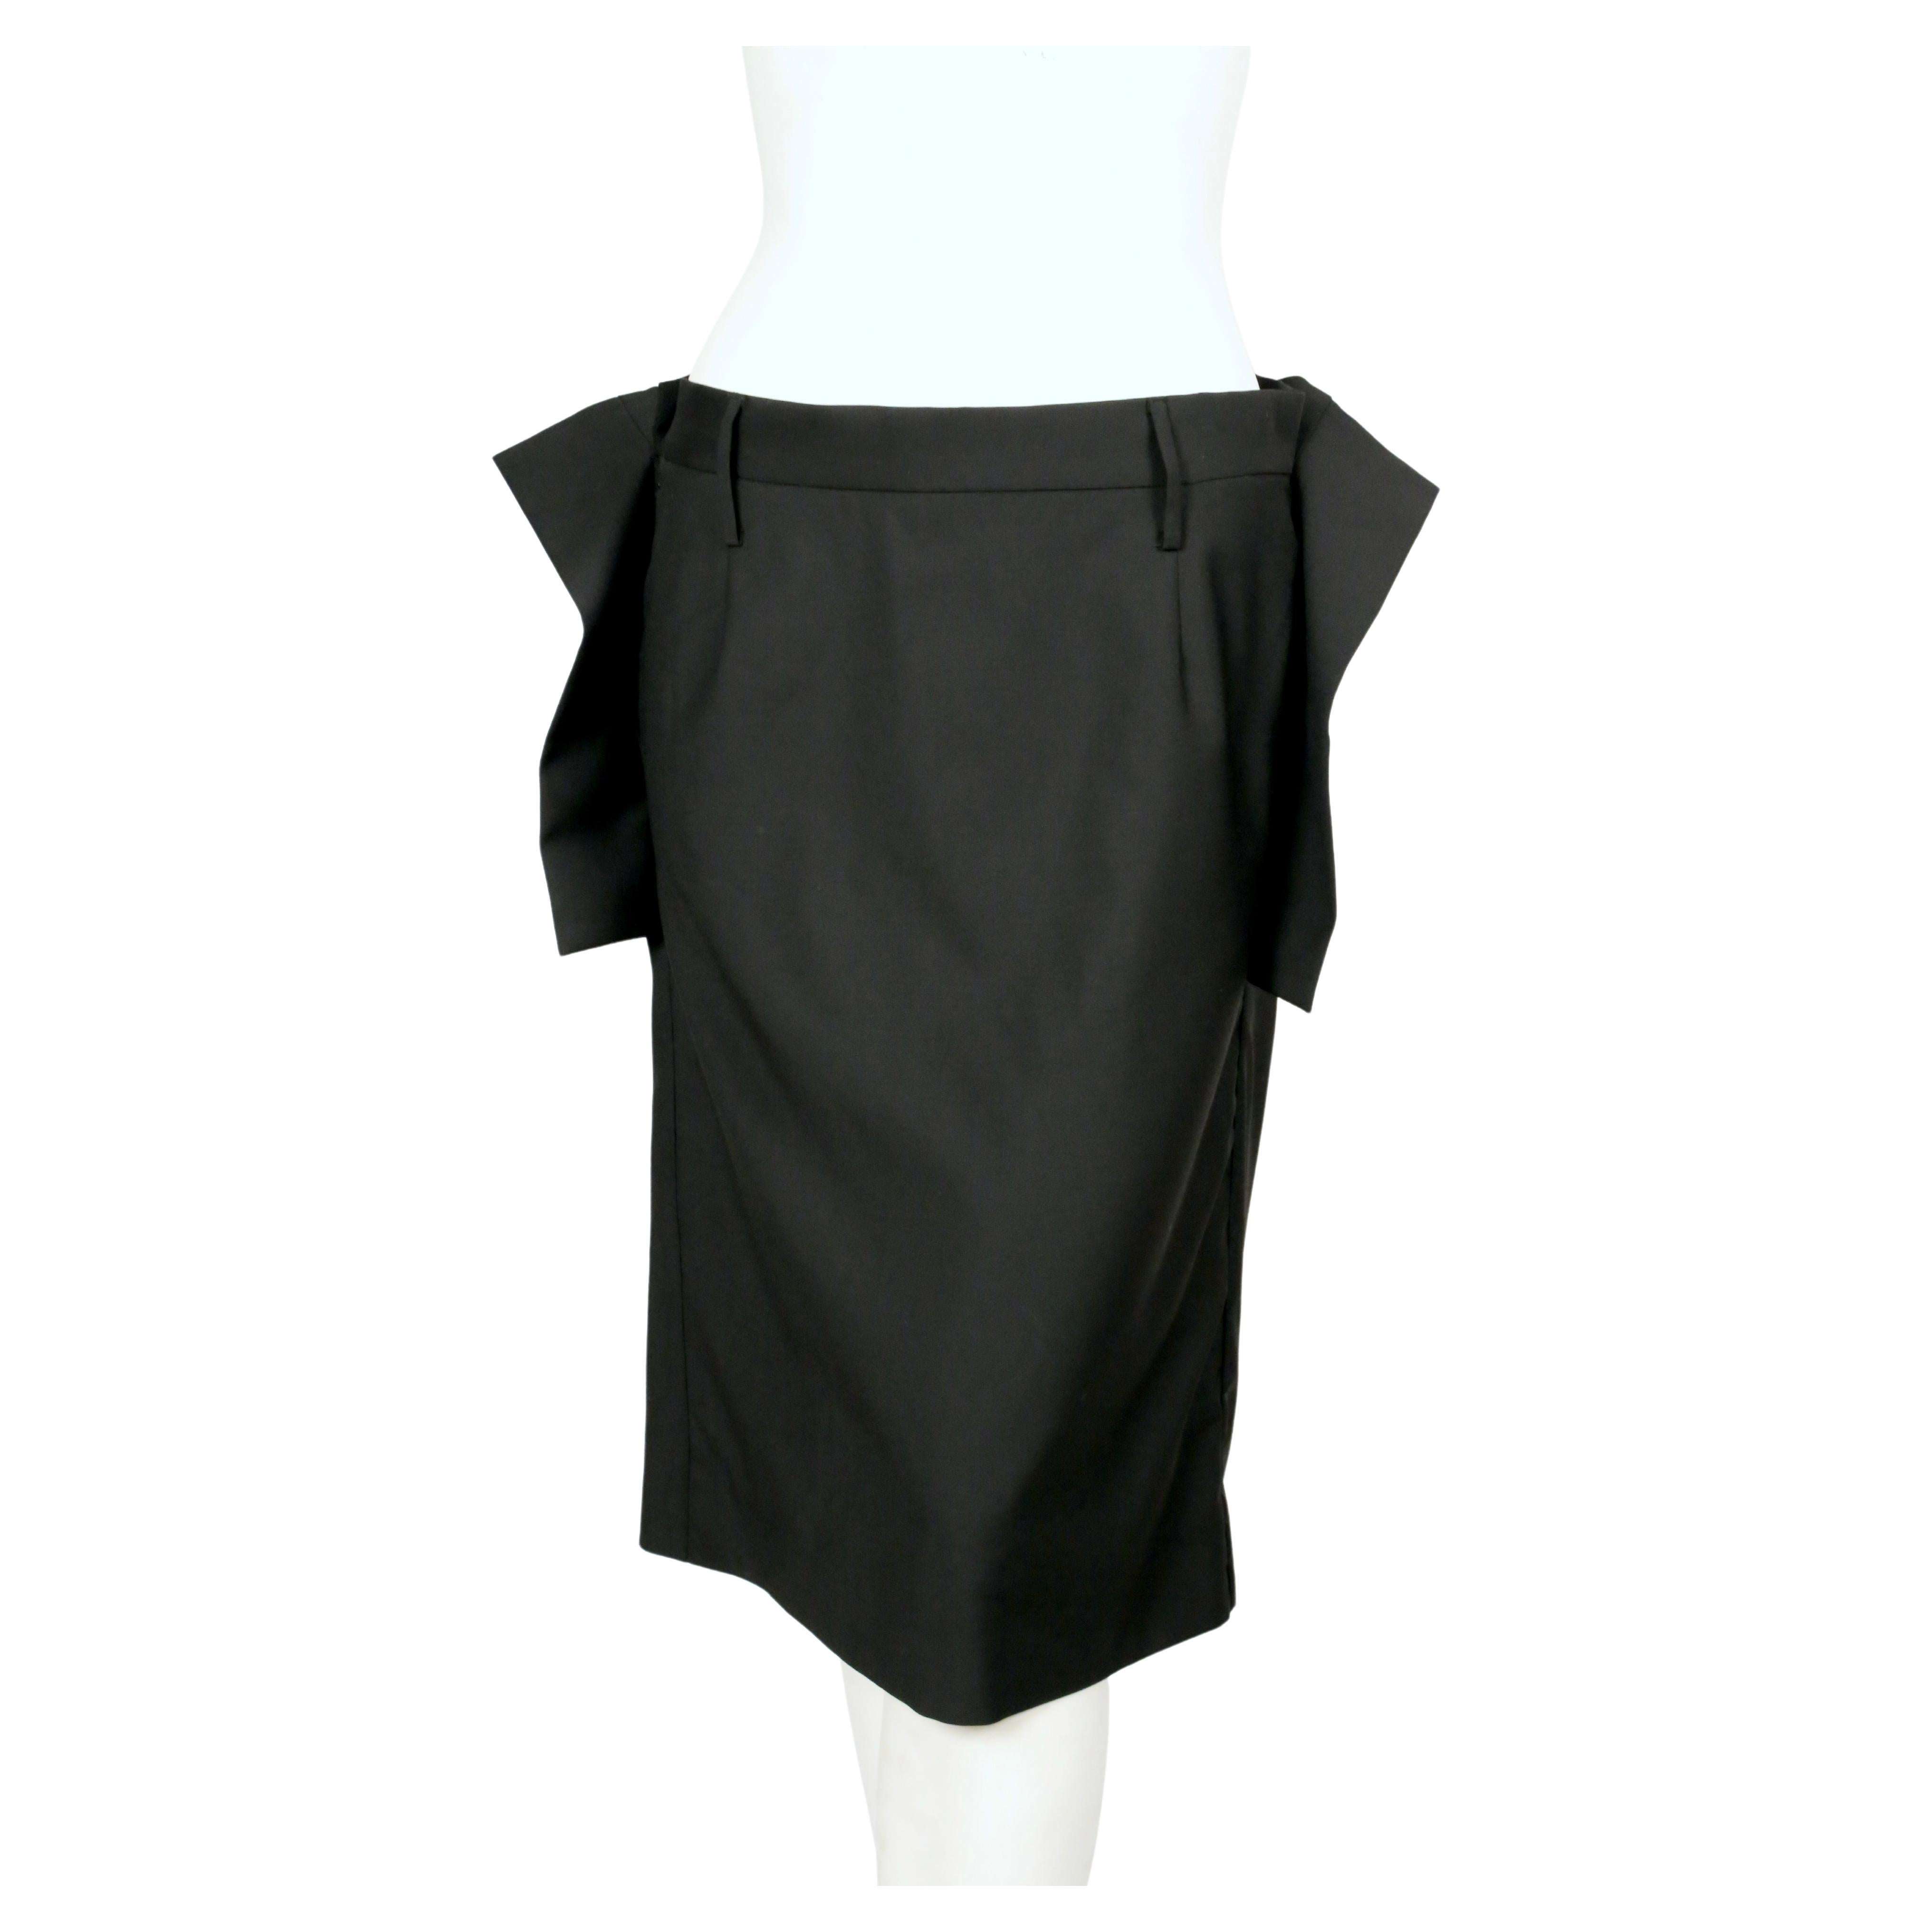 VIVIENNE WESTWOOD black draped top and skirt suit For Sale 2